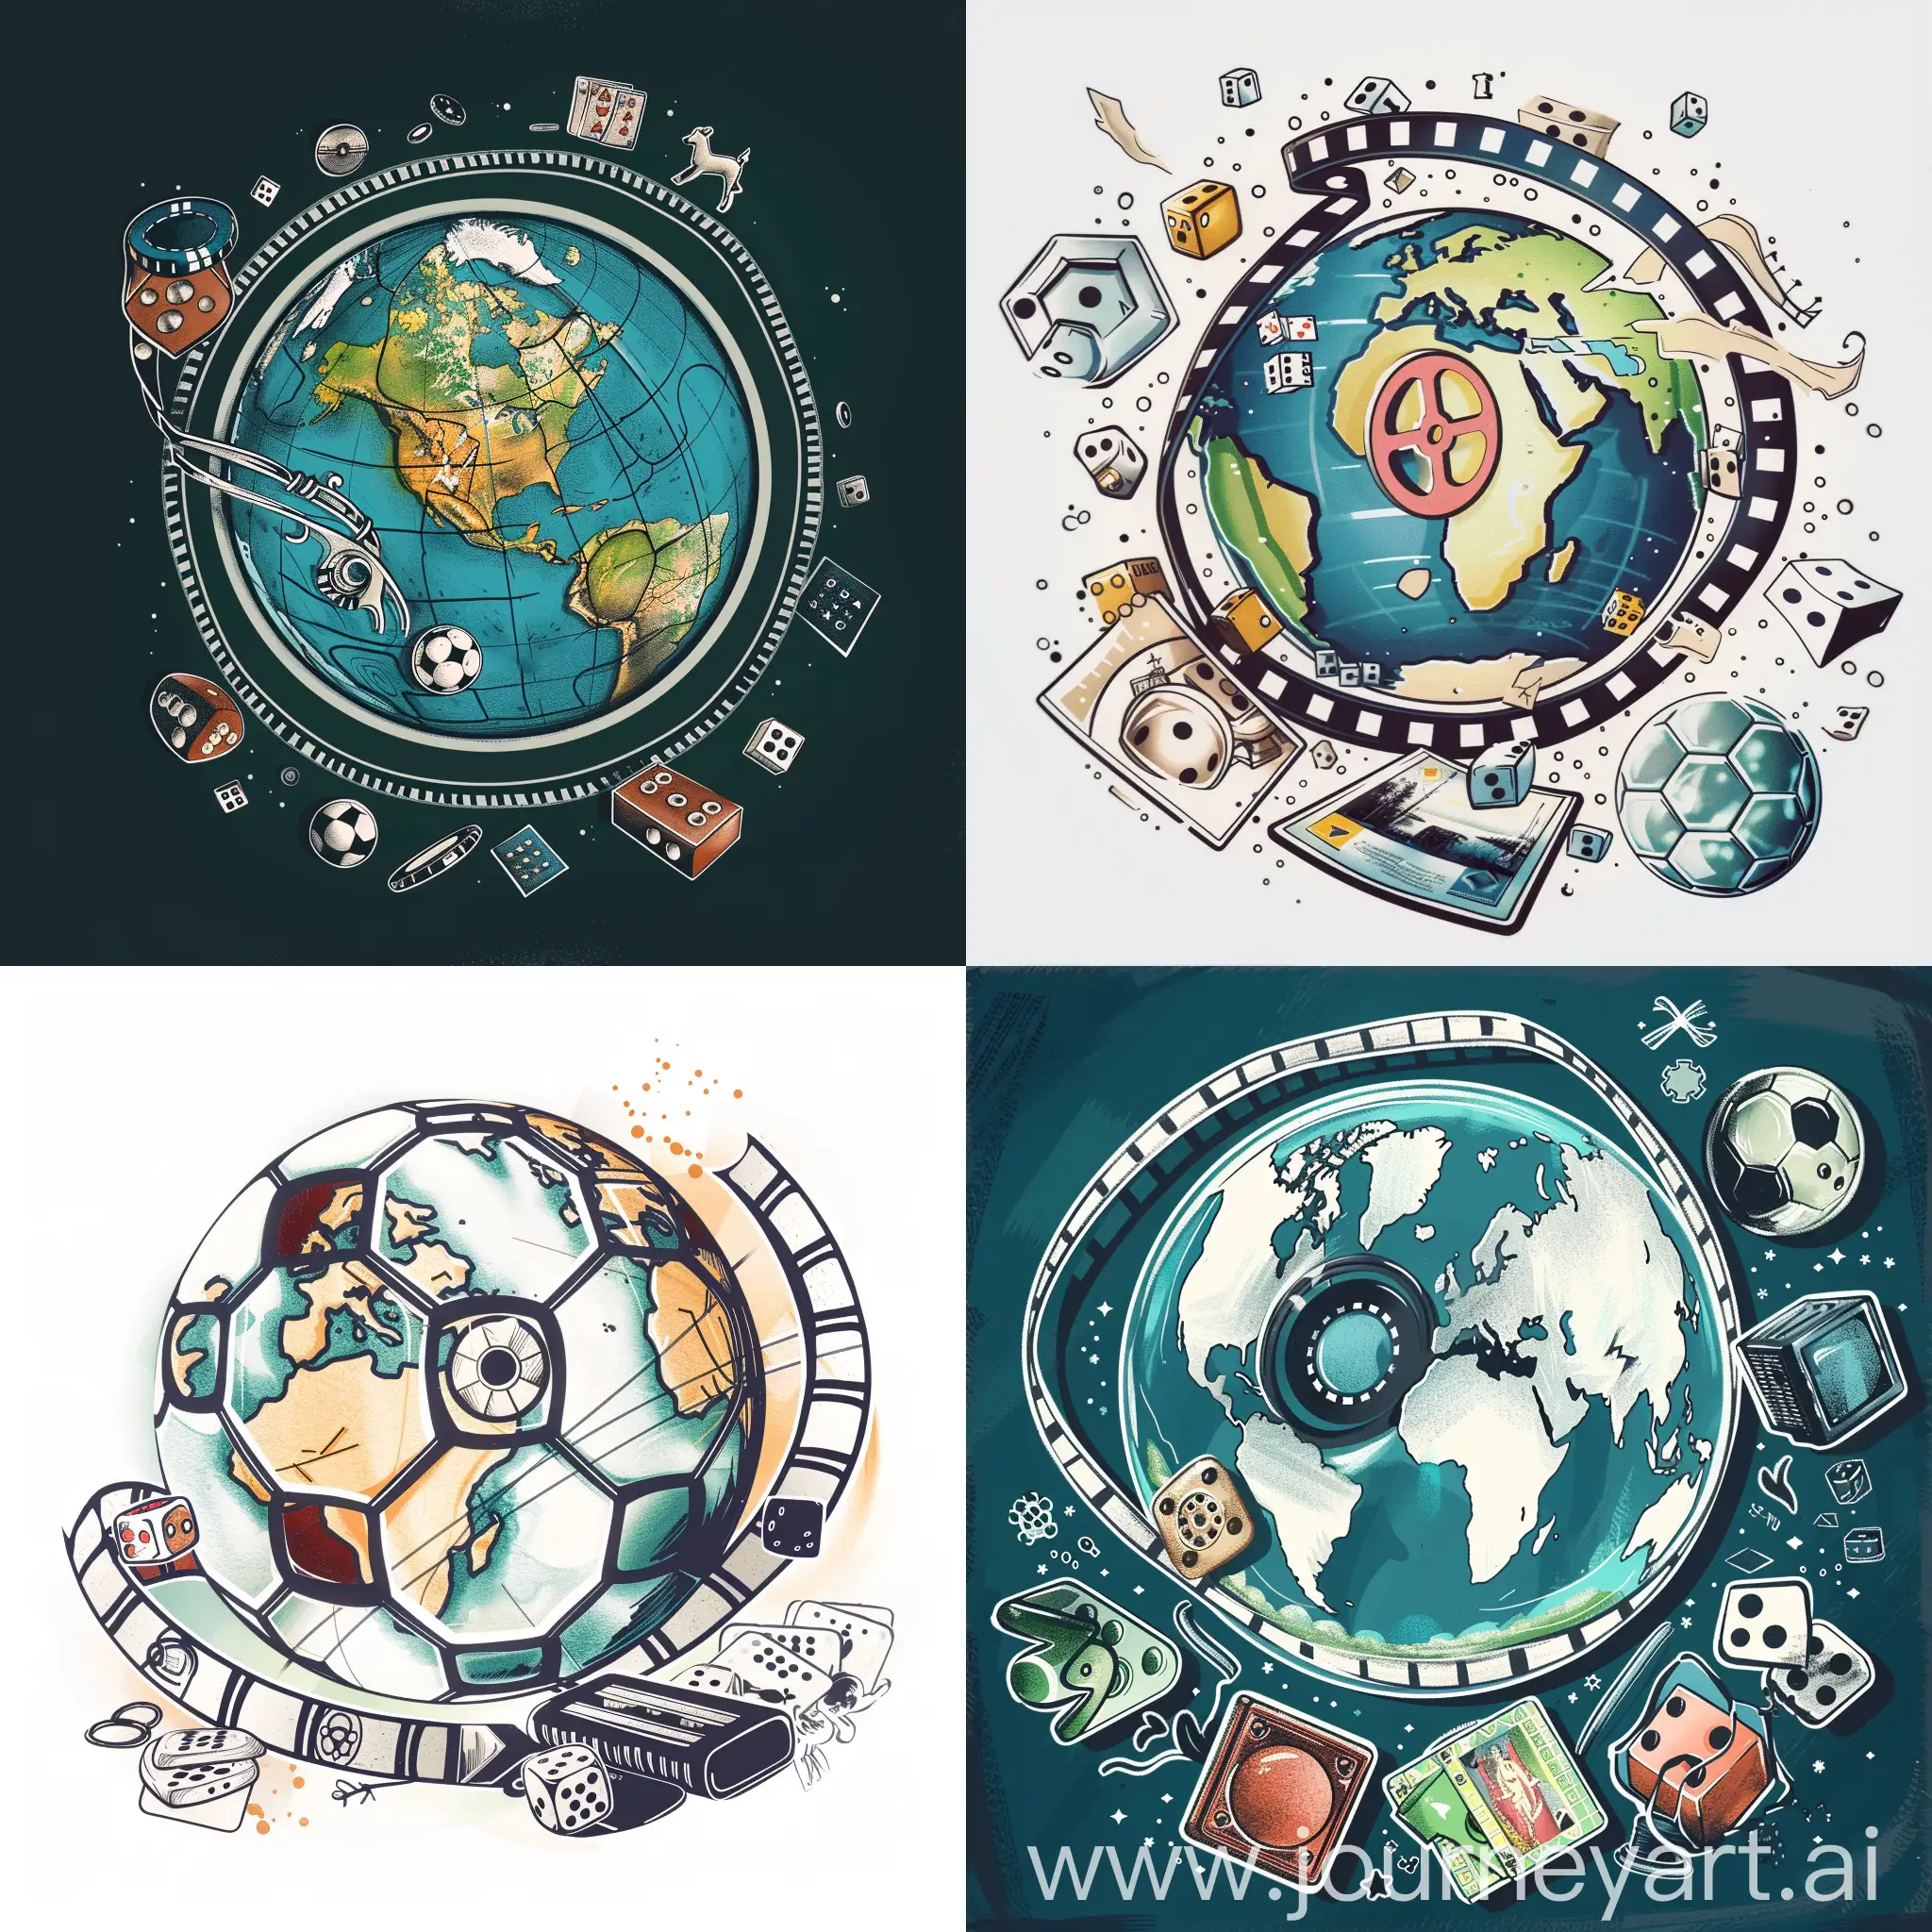 The logo contains a stylized globe representing the general culture and history. Inside the globe is a film reel partially wrapped around it, symbolizing movies. All over the world, there is a soccer ball that bounces, which refers to the aspect of soccer. Surrounding the globe are delicate elements representing different games, such as dice, cards, and a game console.